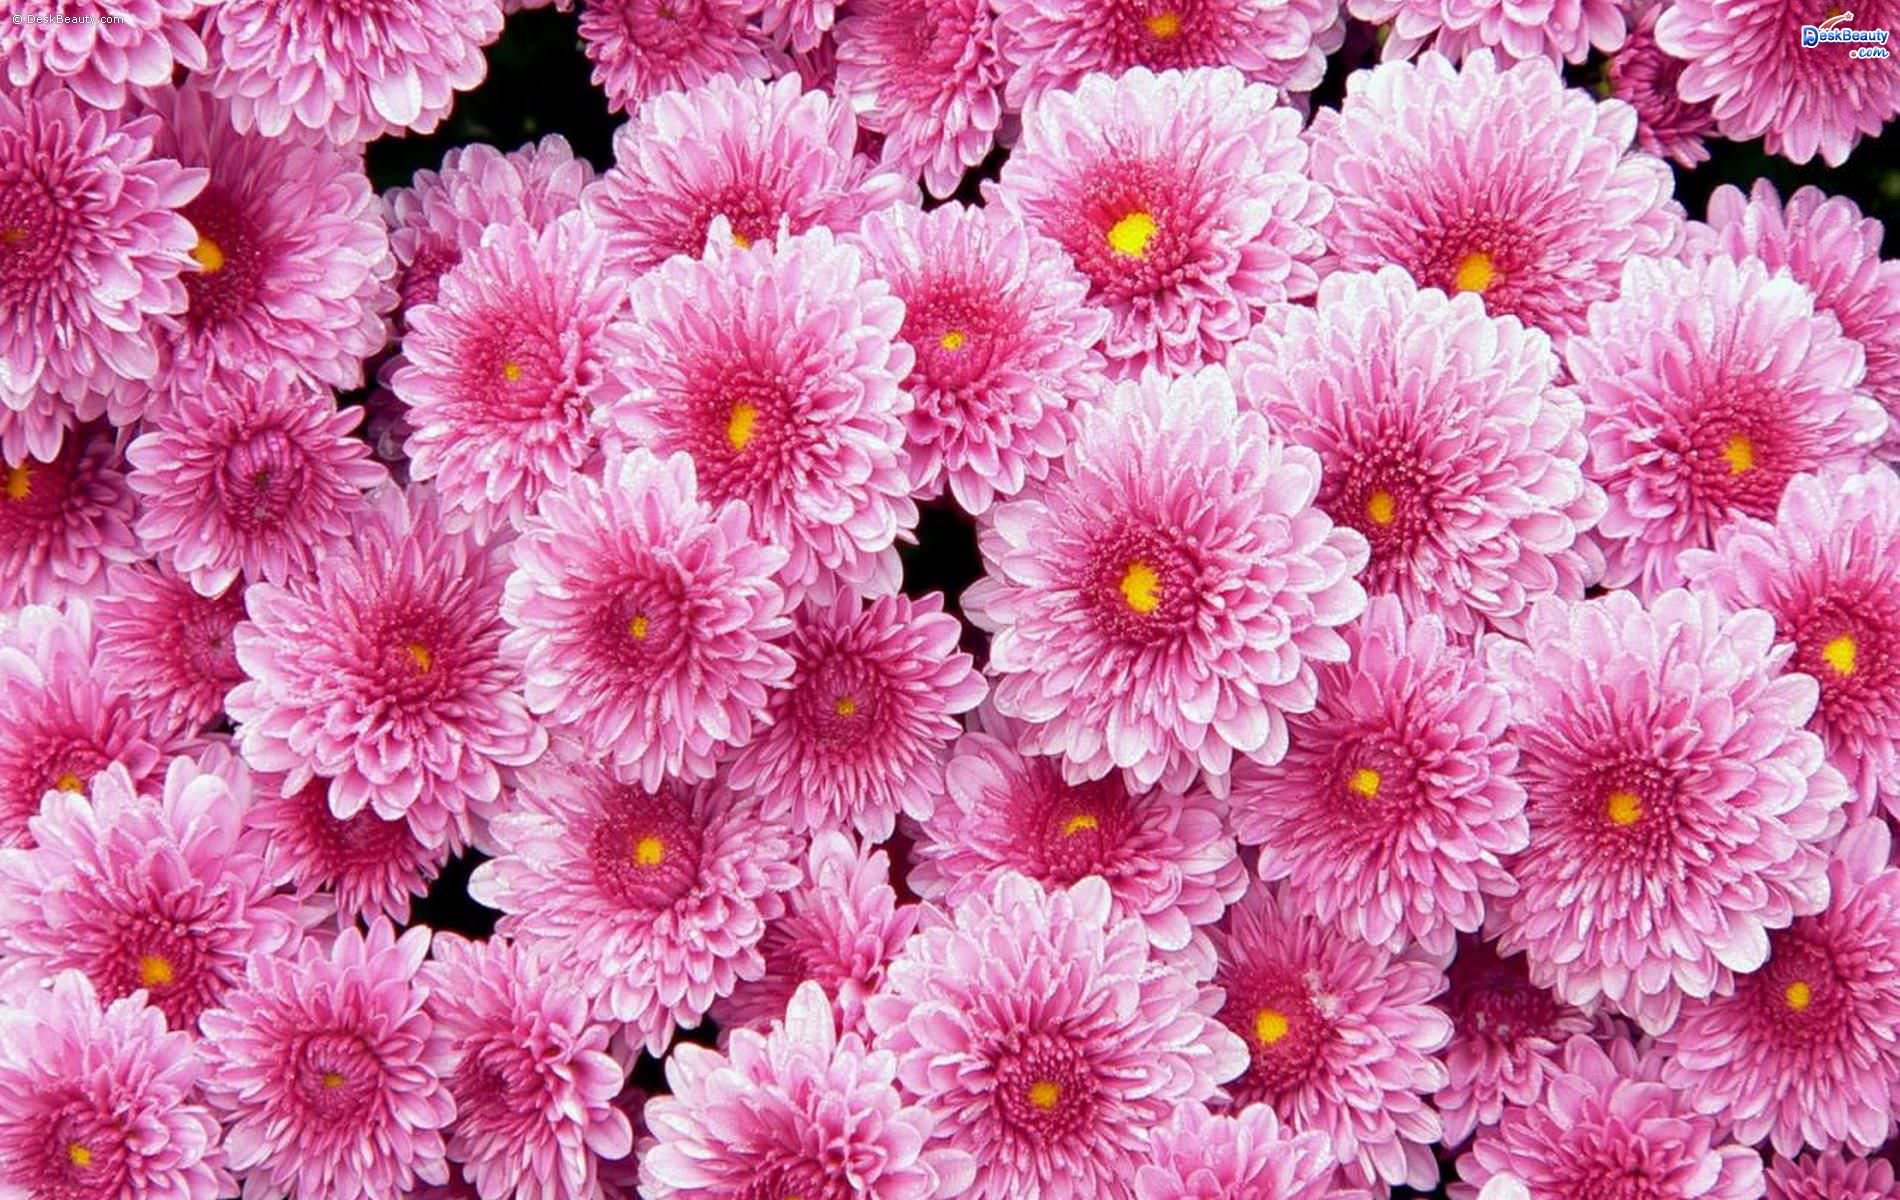 Flower Background Wallpaper Pictures Image